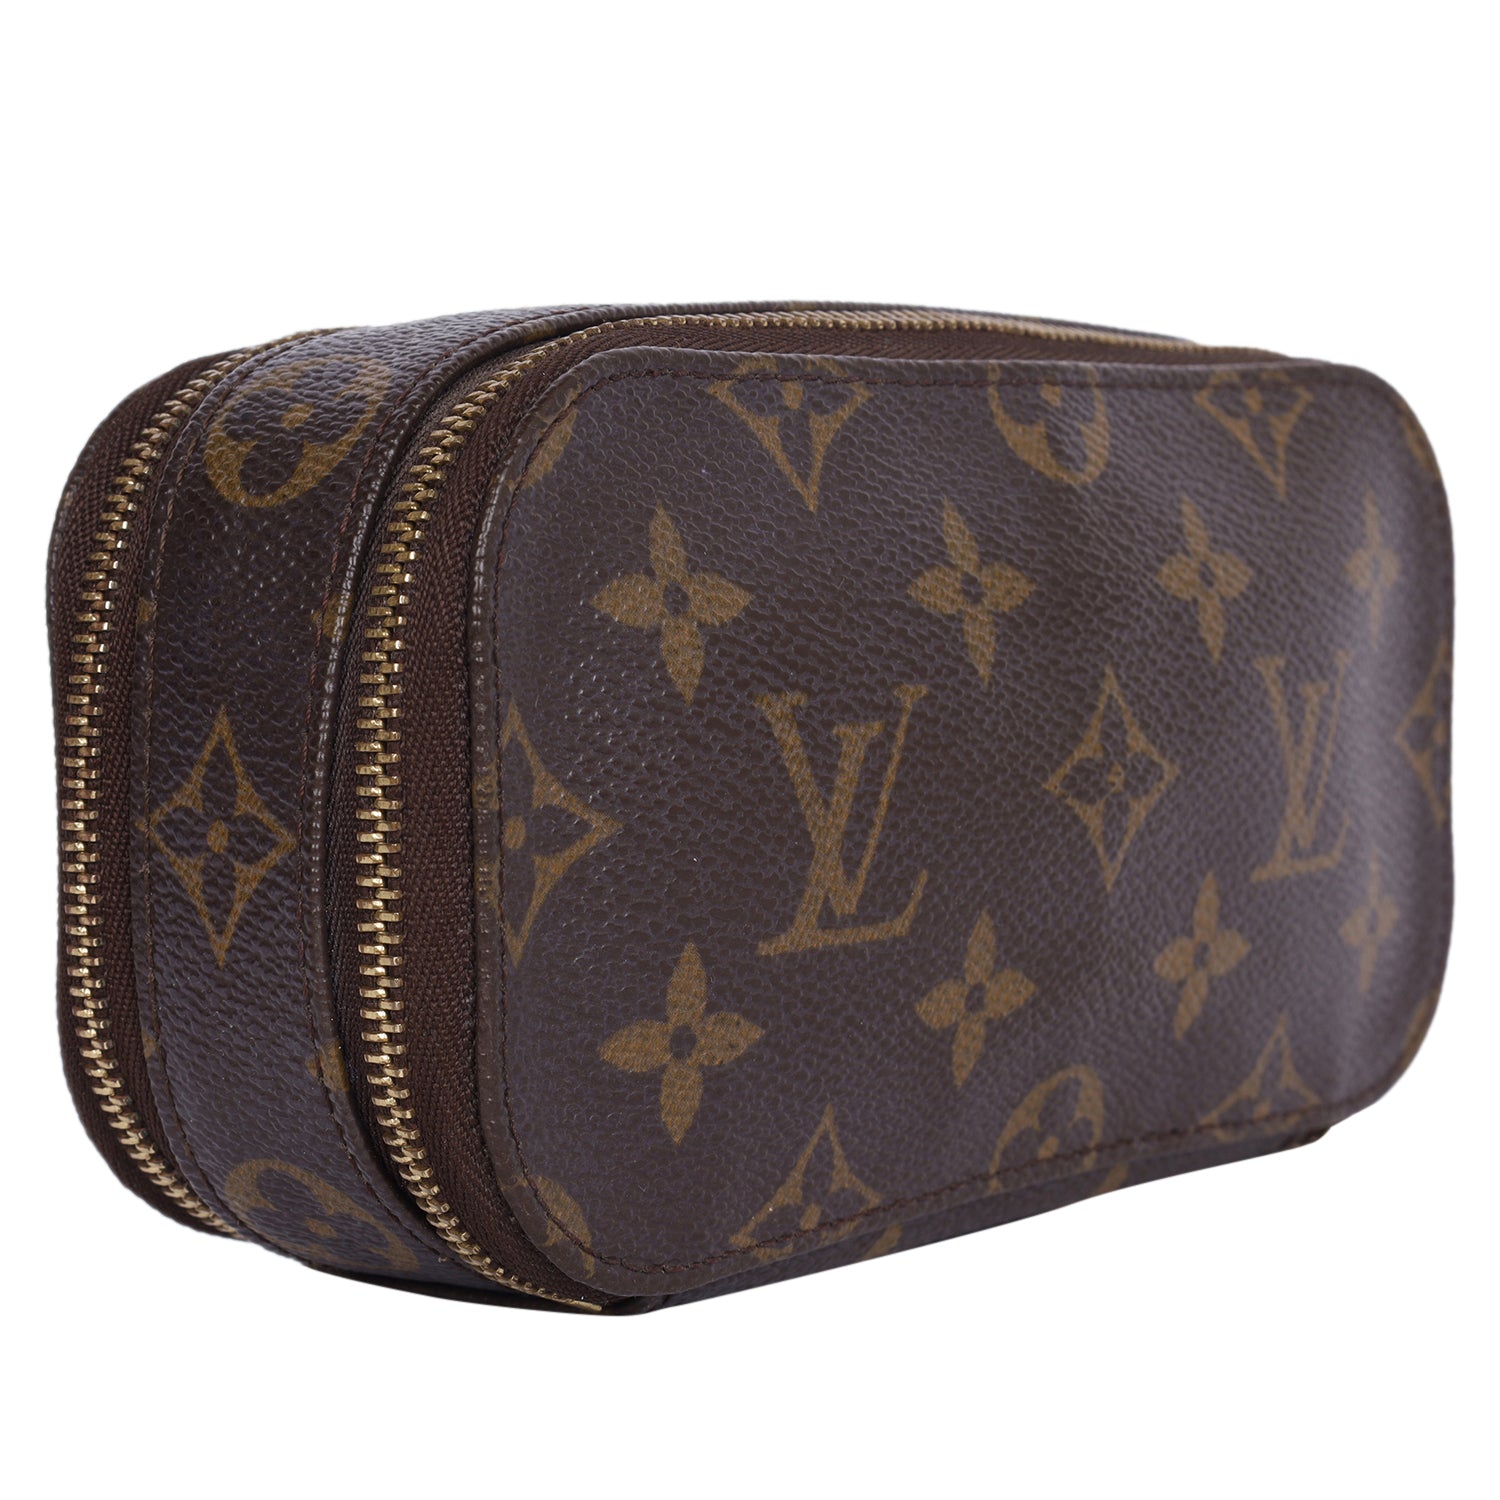 Monogram Canvas Trousse Cosmetic Bag (Authentic Pre-Owned) – The Lady Bag